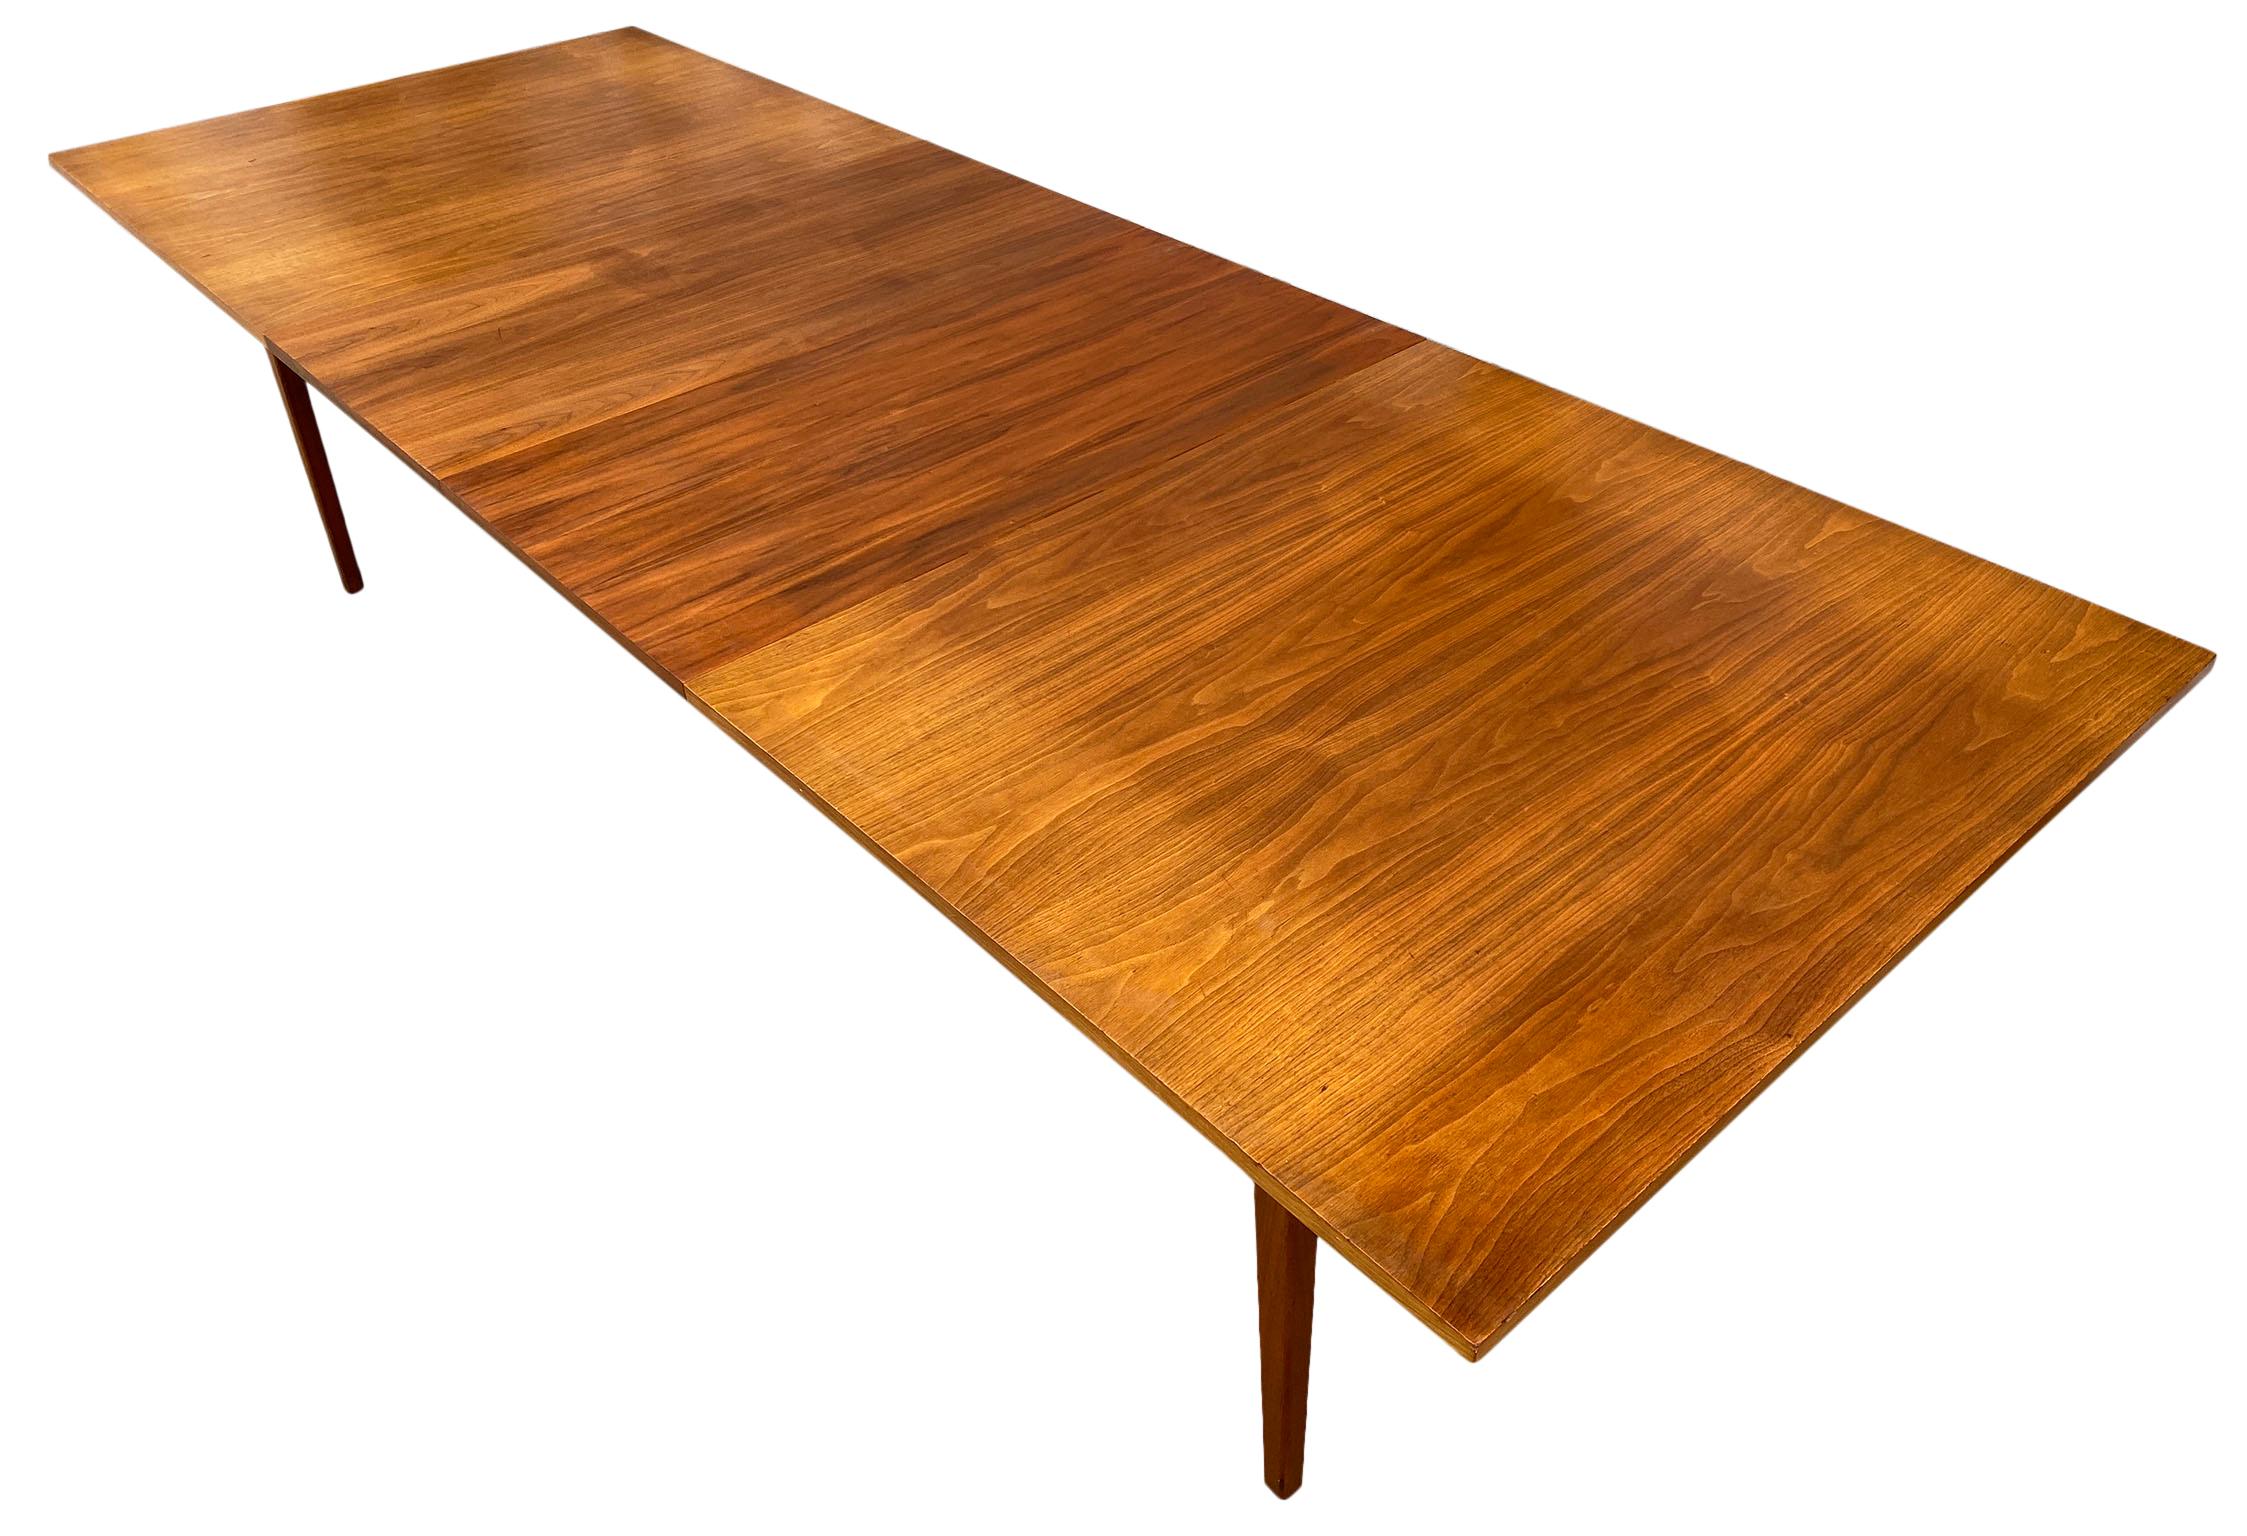 Walnut Midcentury George Nelson Herman Miller Expandable Dining Table with '2' Leaves